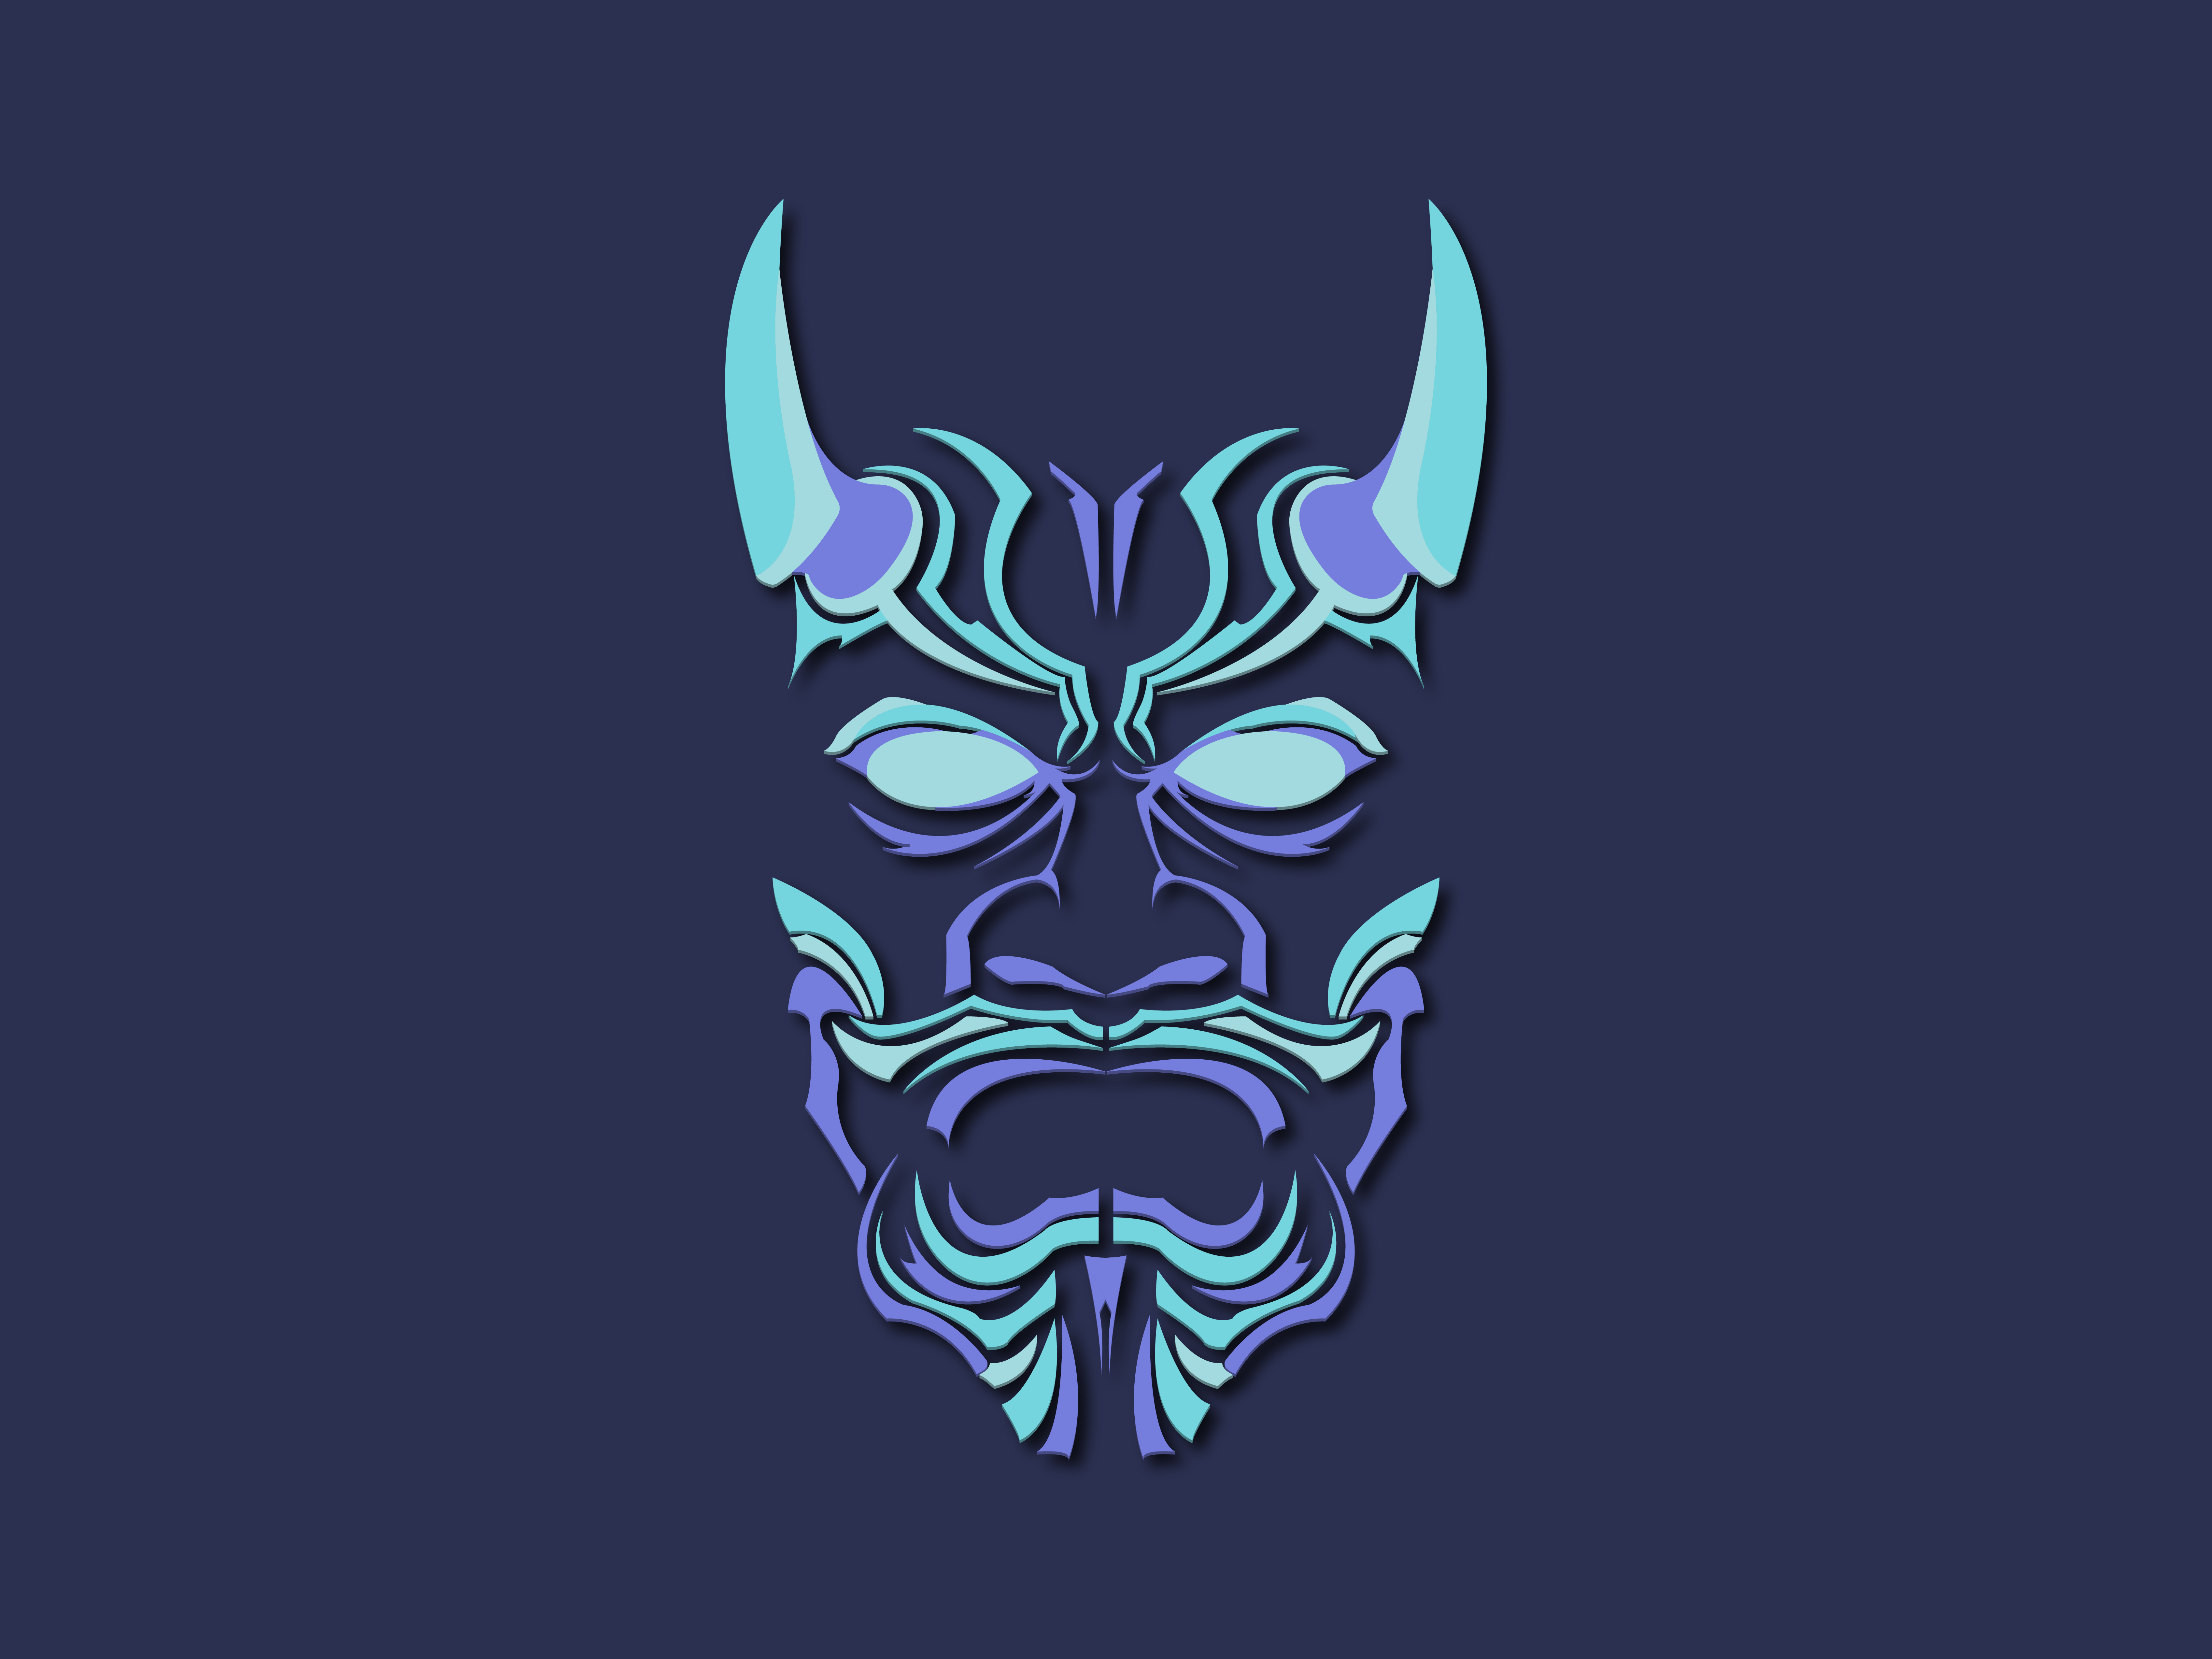 Oni by Satinder Dhillon on Dribbble